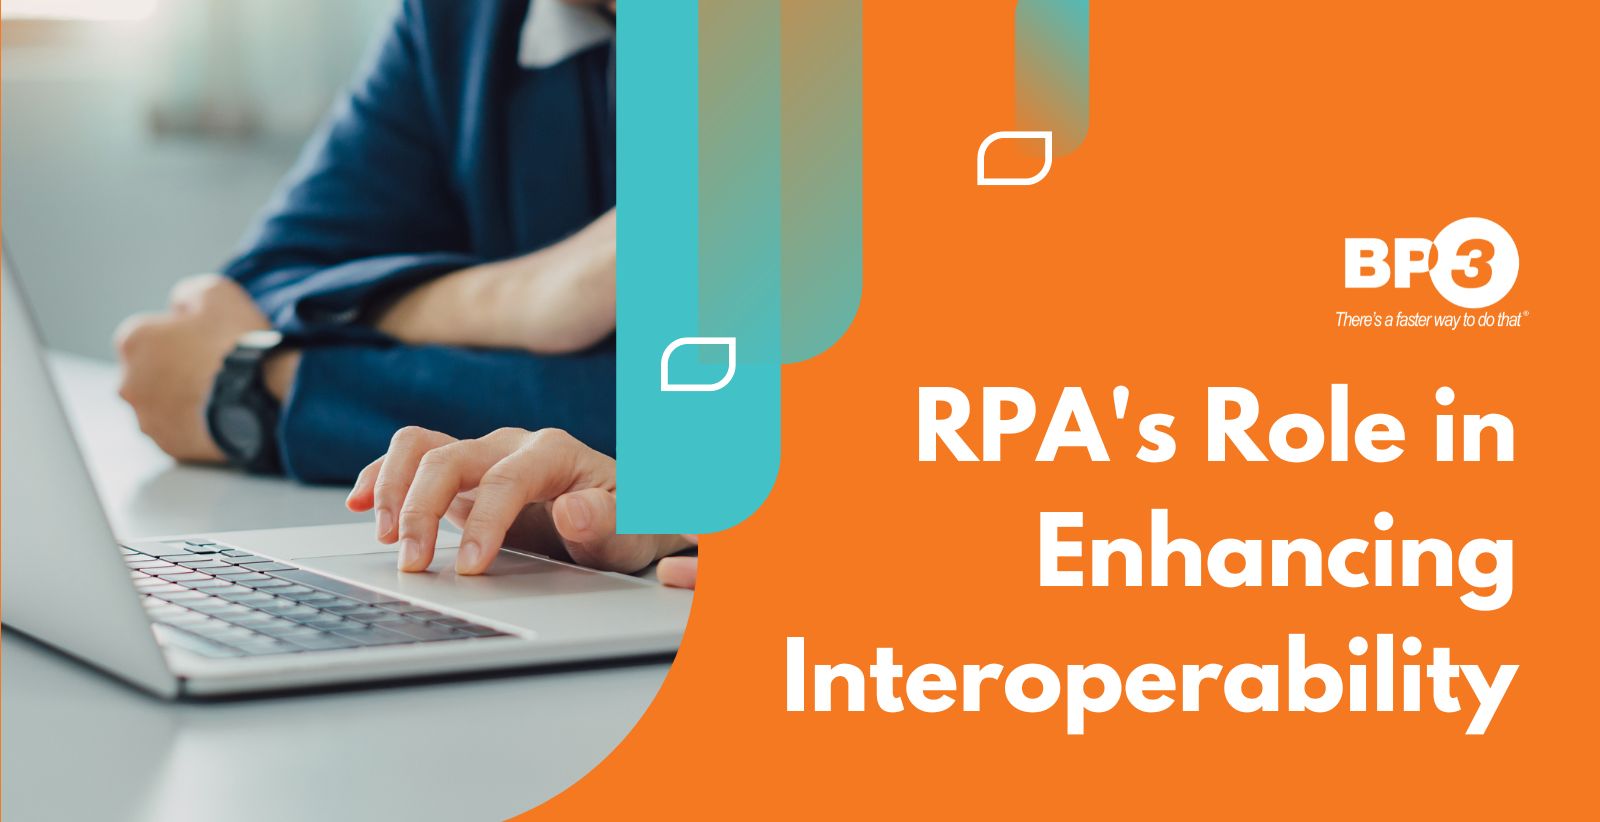 RPA’s Role in Enhancing Interoperability